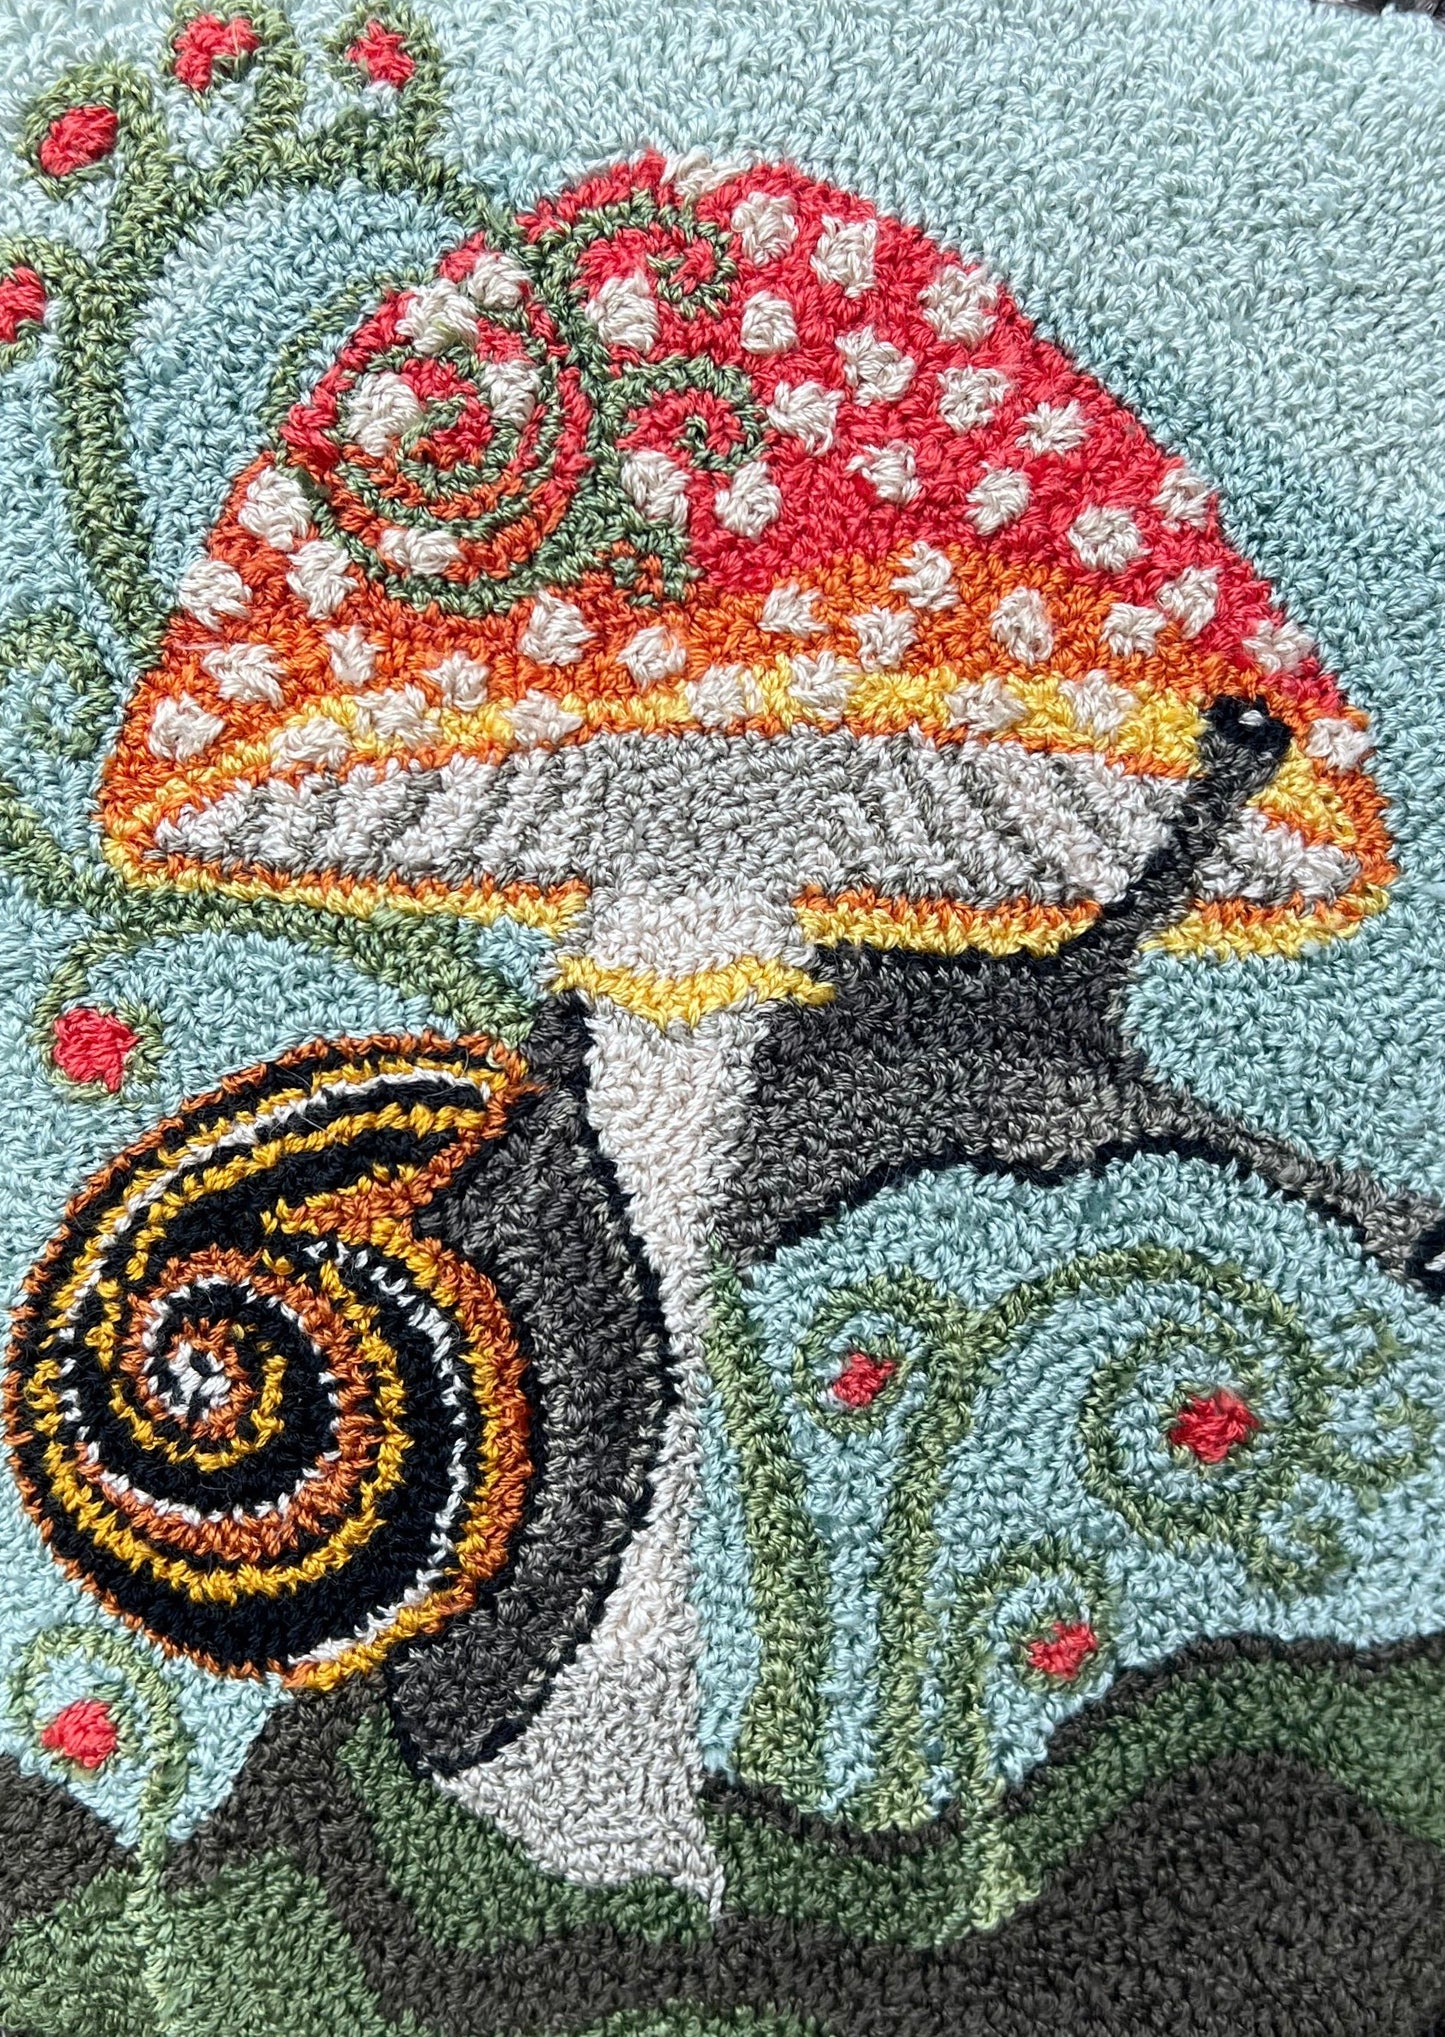 Presenting the enchanting "ENTWINED" Paper Rug Hooking Pattern by Orphaned Wool. This delightful design showcases a charming snail gracefully wrapping around a vibrant mushroom. This fabulous paper pattern offers you the opportunity to bring the wonders of nature to life and create the perfect size pattern you desire. The Entwined pattern is copyrighted 2024 Kelly Kanyok, Orphaned Wool.